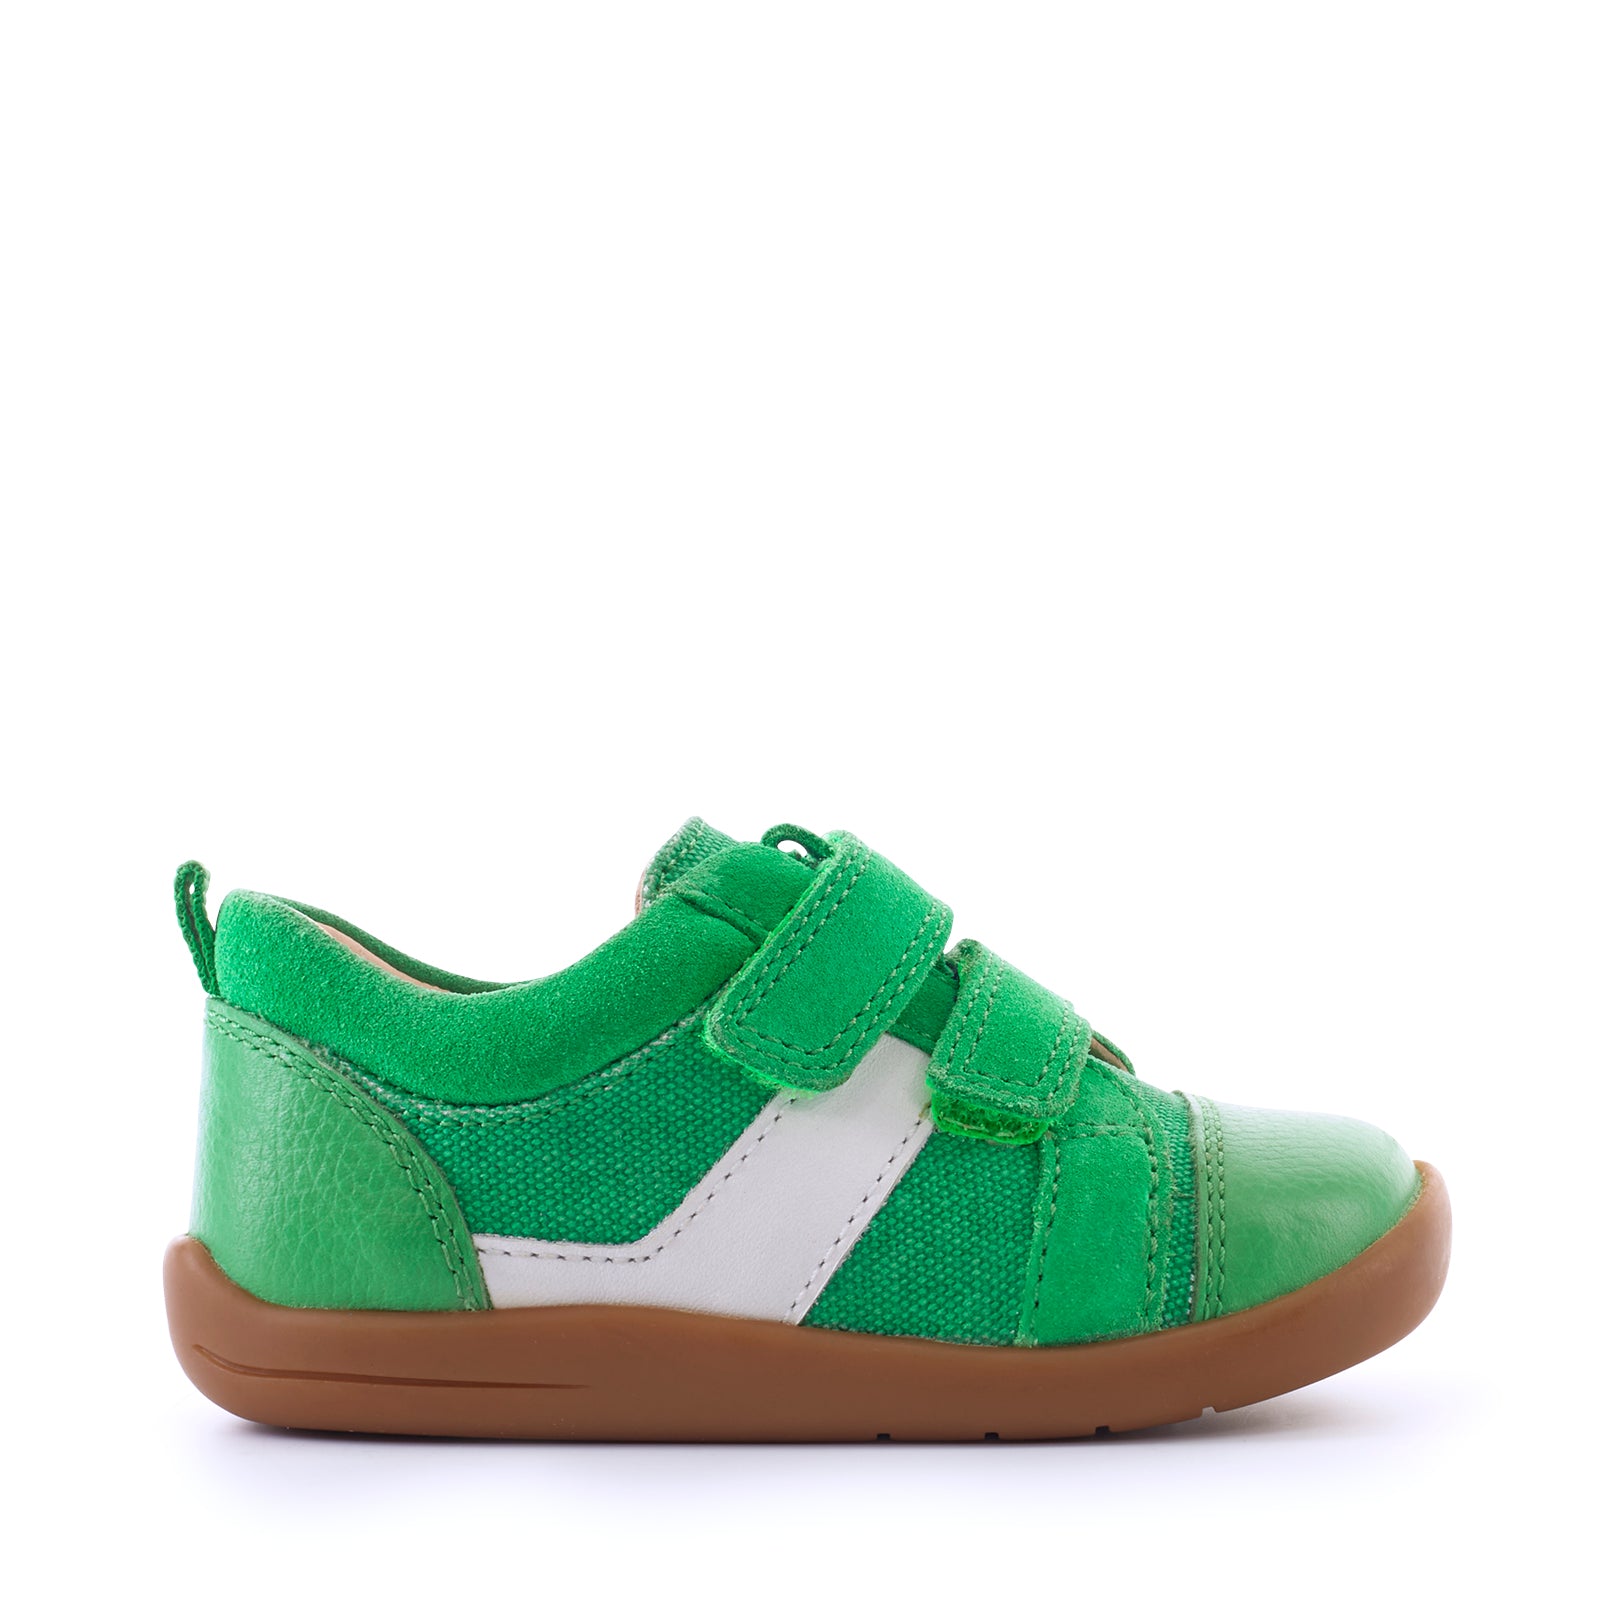 A boys casual shoe by Start Rite, style Maze, in green and white with double velcro fastening. Right side view.